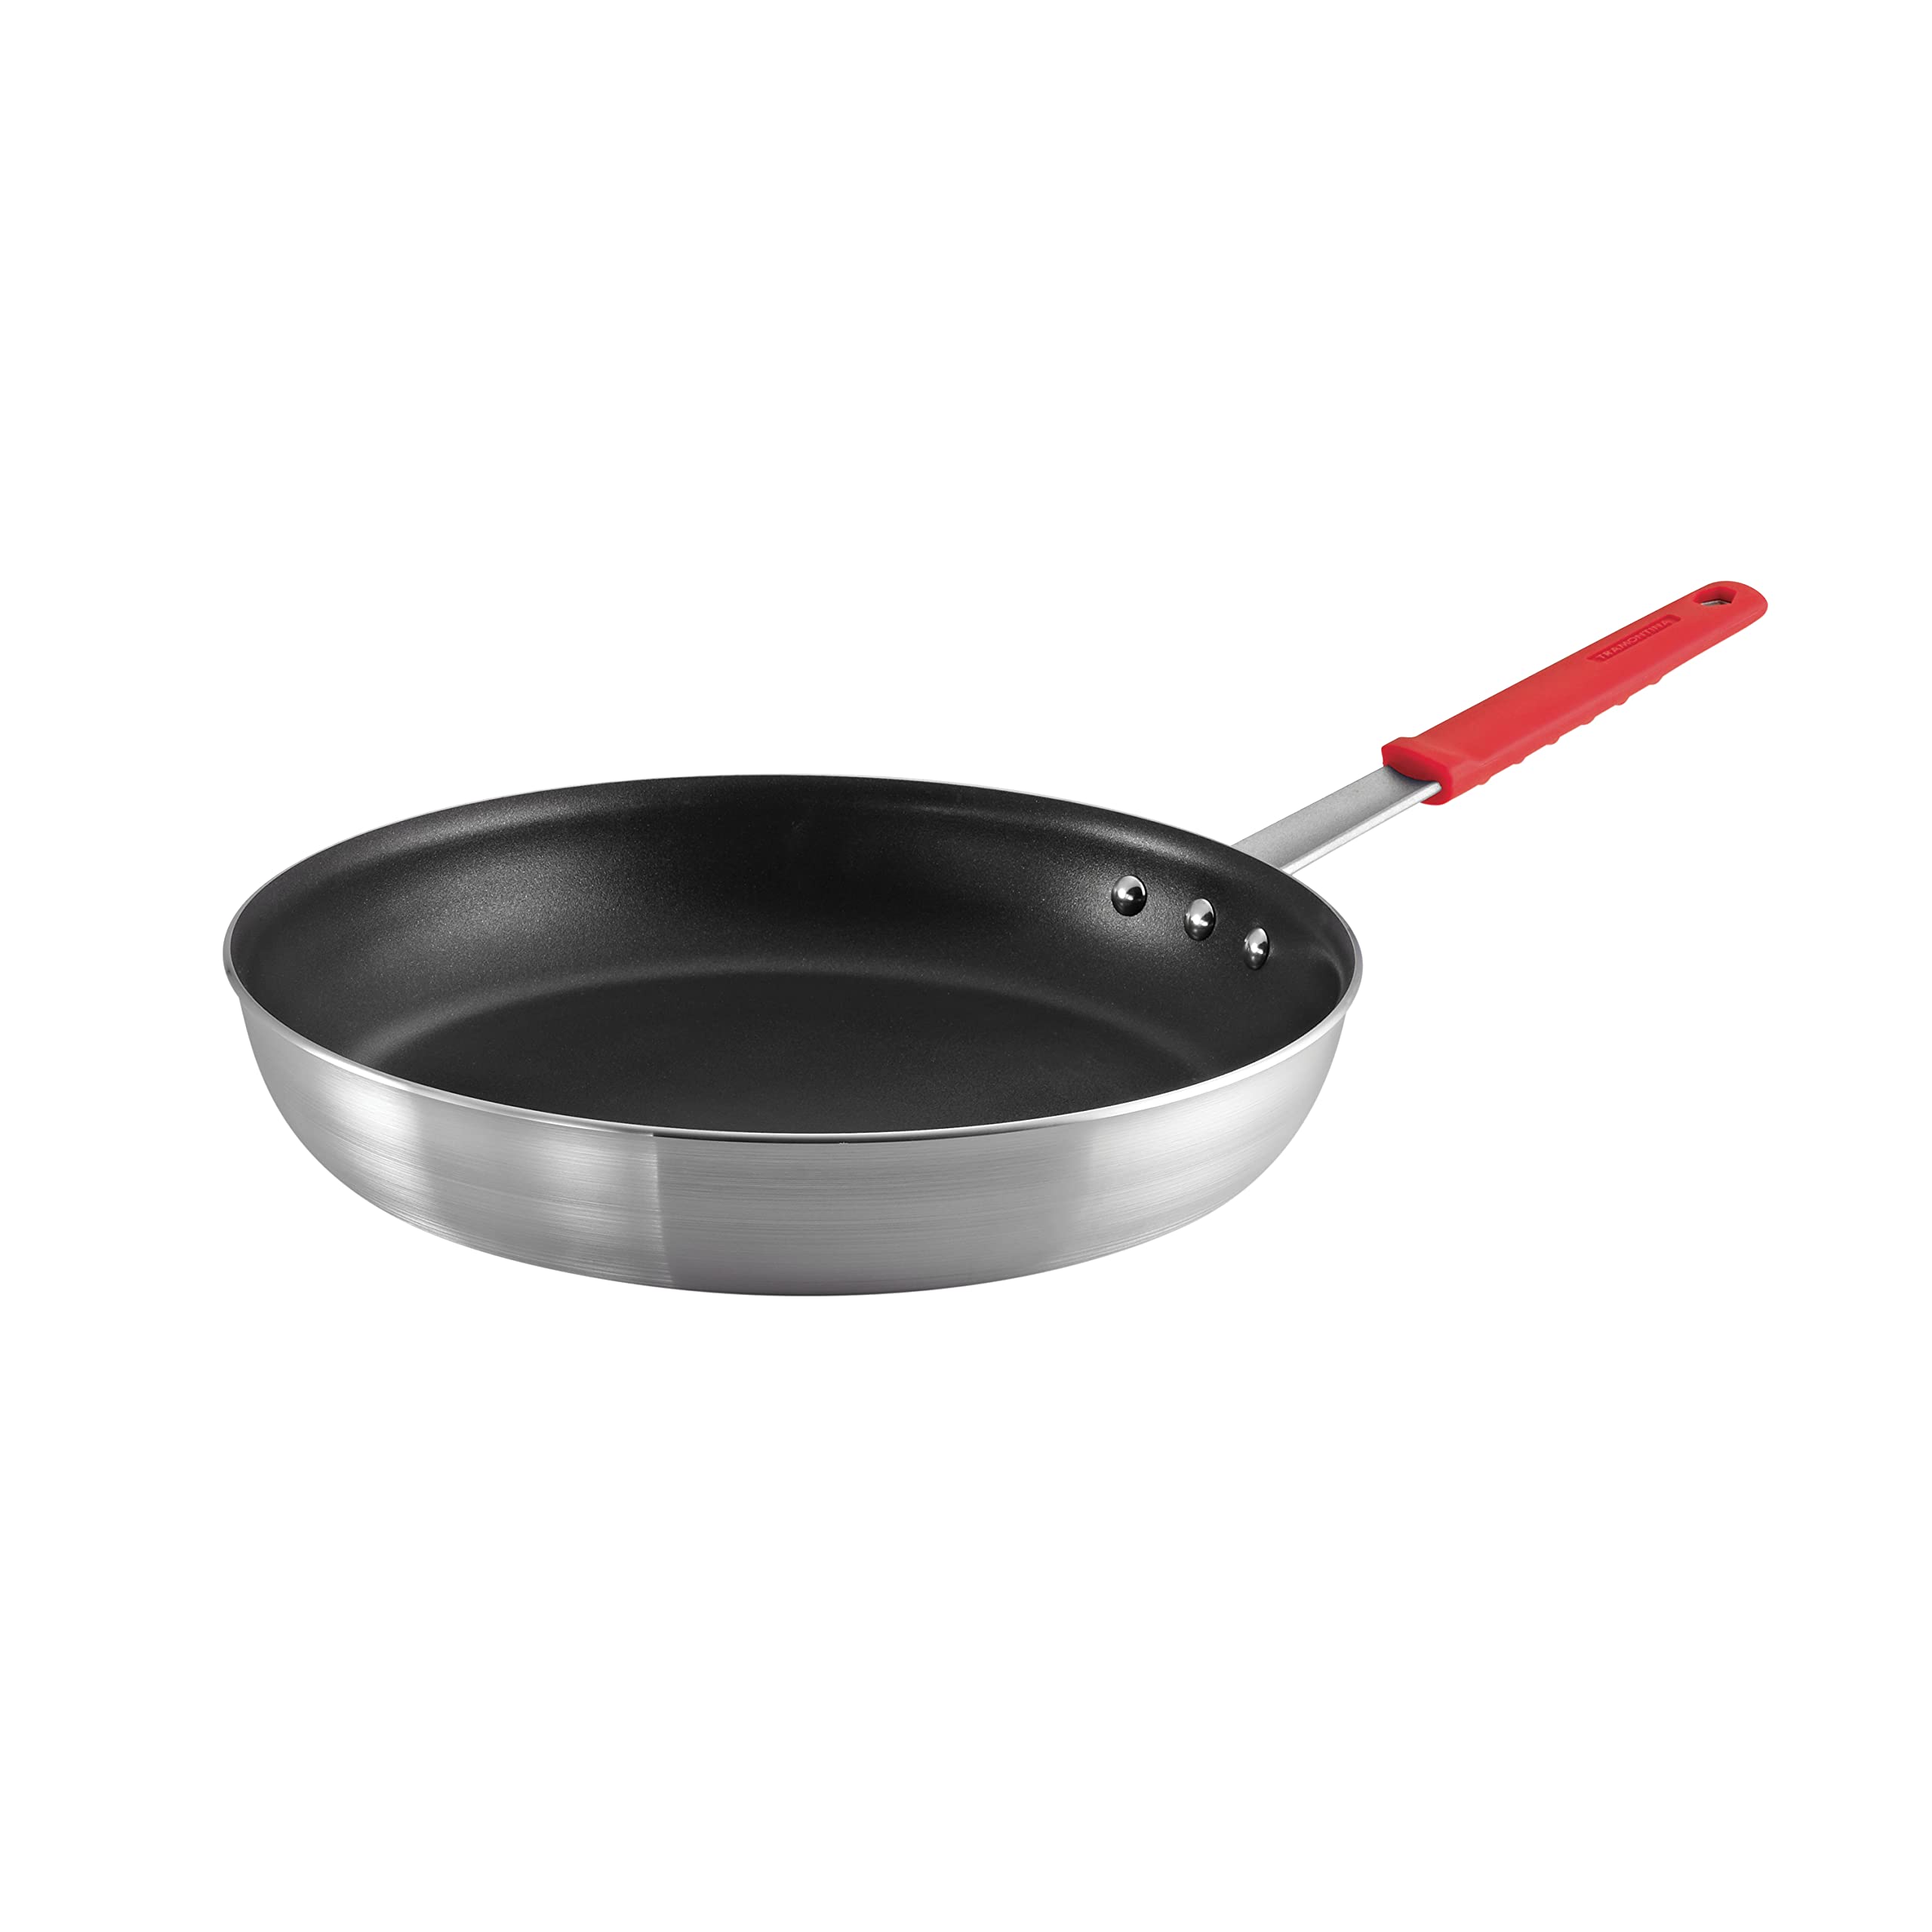 (used, like new) 14" Tramontina Professional Aluminum Nonstick Fry Pan - Made in USA $18 @ Amazon